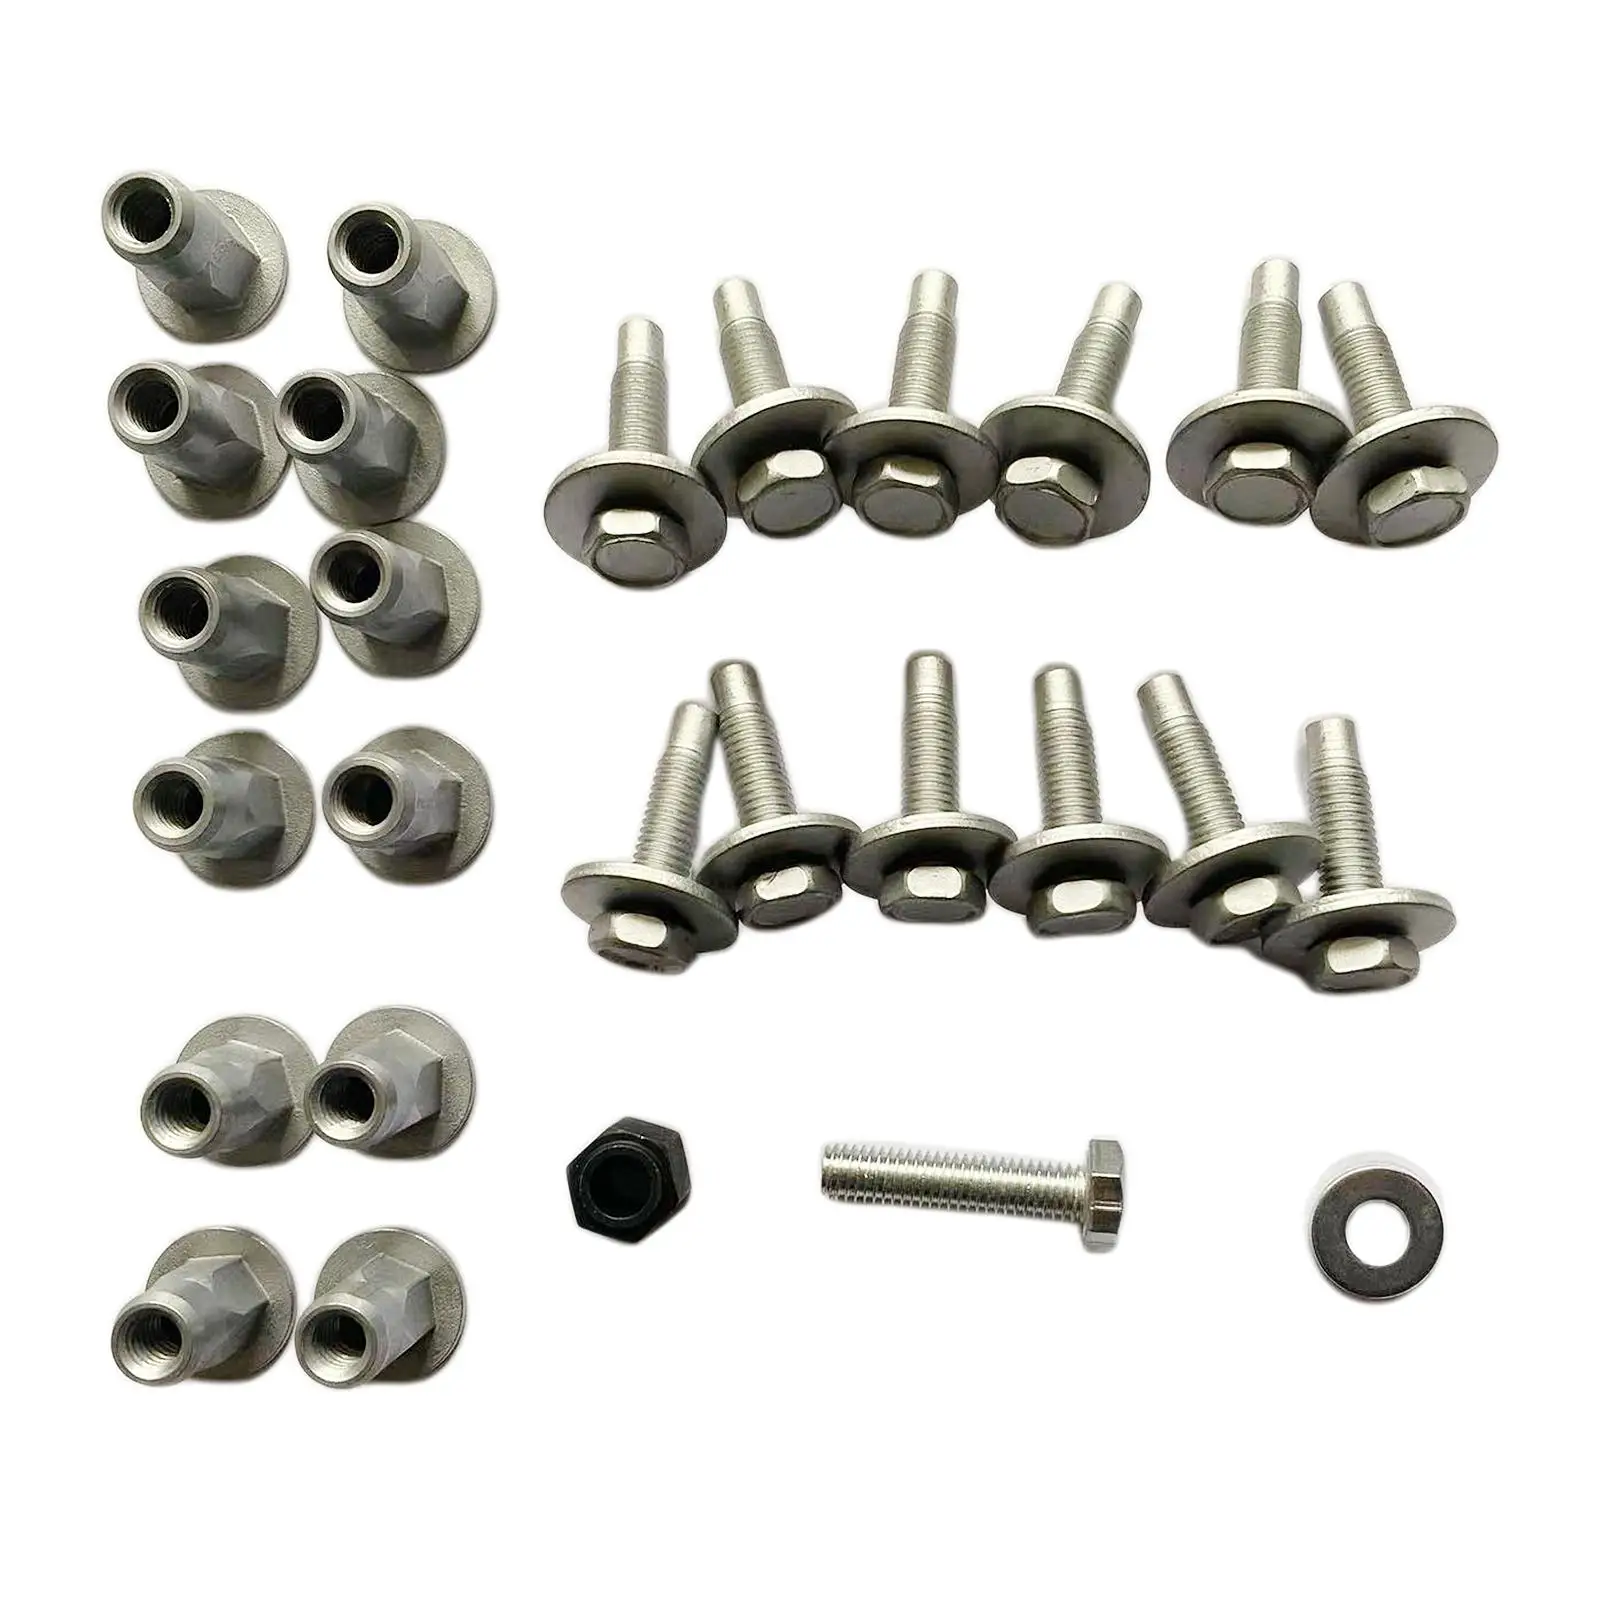 27pcs Car Sidestep Mounting Kit Iron Nuts Bolts Set for Dodge RAM 1500 2500 3500 Modification Direct Replaces Accessory